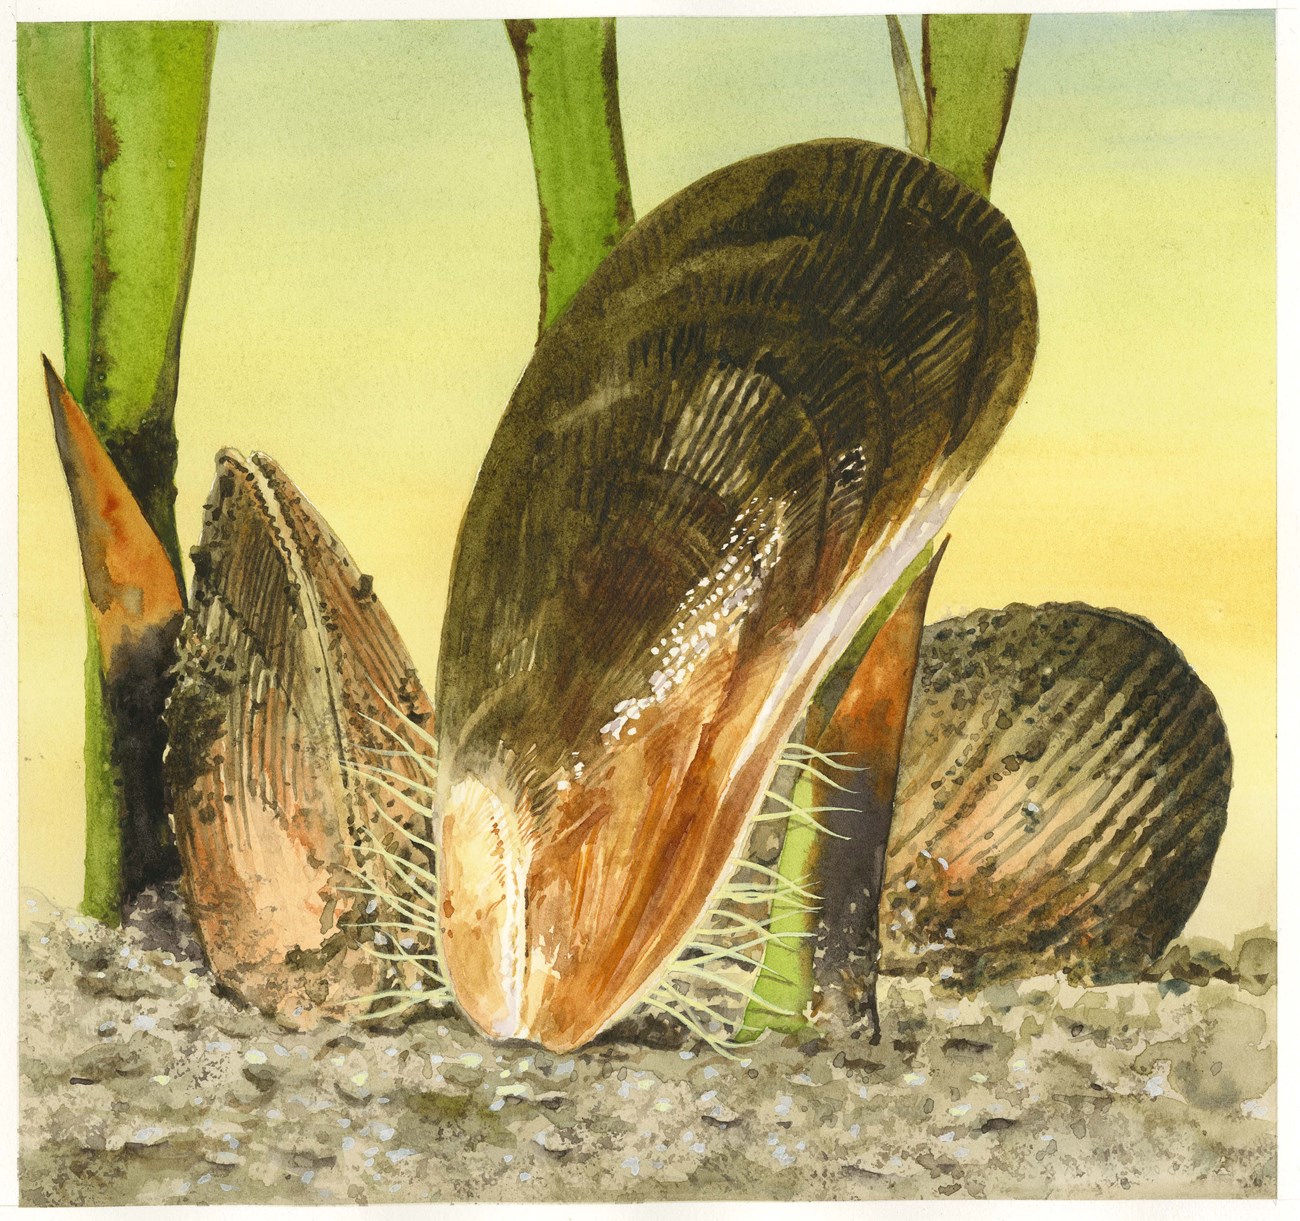 Illustrated ribbed mussel shells sit upright in brown dirt near green aquatic plant stems.